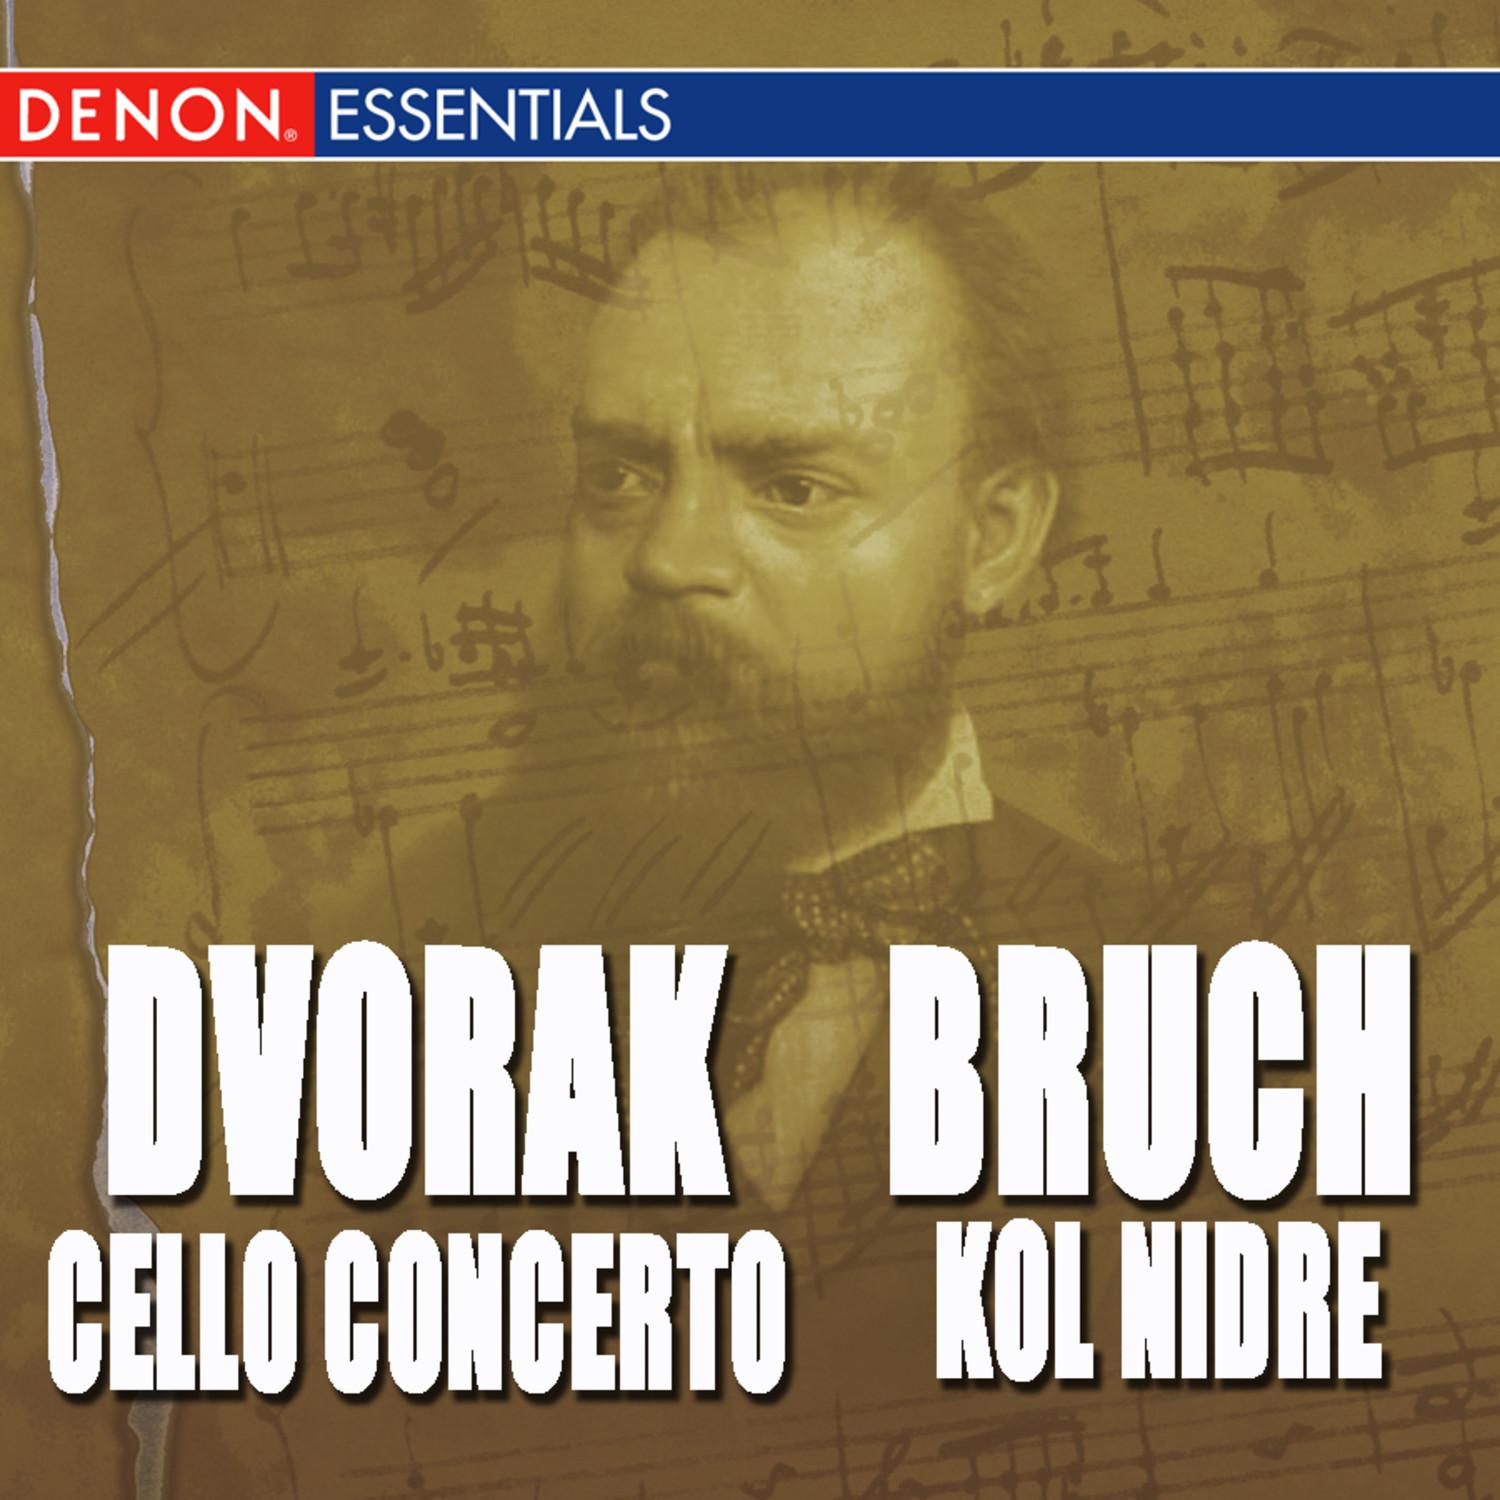 Concerto for Cello and Orchestra in B Minor, Op. 104: III. Finale